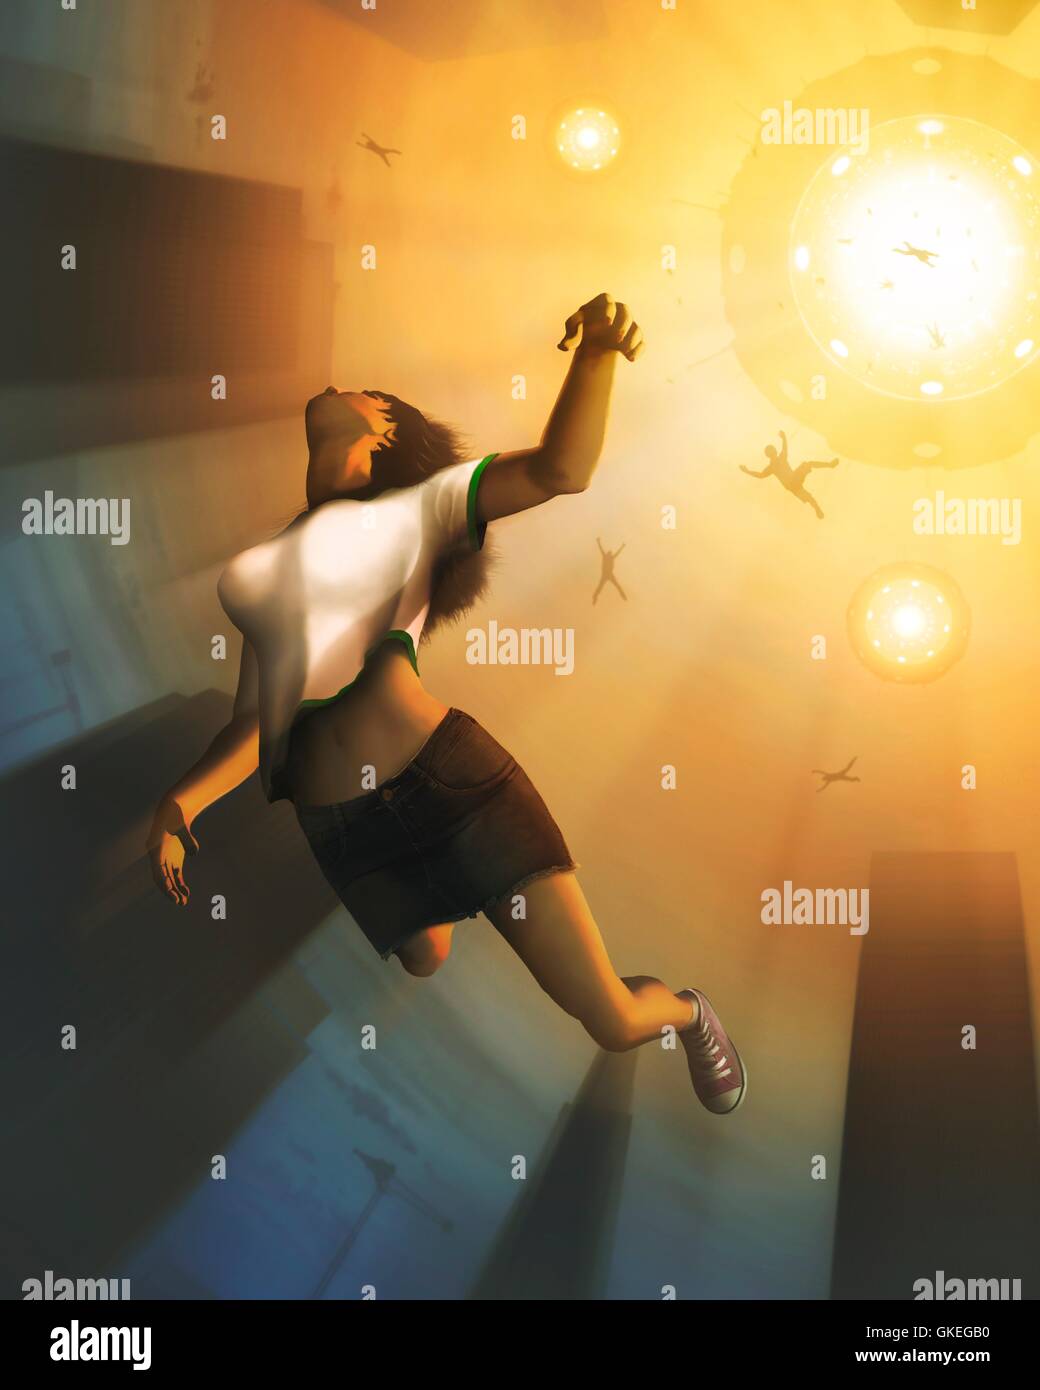 Alien abduction. Computer artwork of a humans being abducted by aliens in a flying saucer. Alongside the increased number of Unidentified Flying Object (UFO) sightings, the number of people claiming to have been abducted by aliens has also risen. Stock Photo